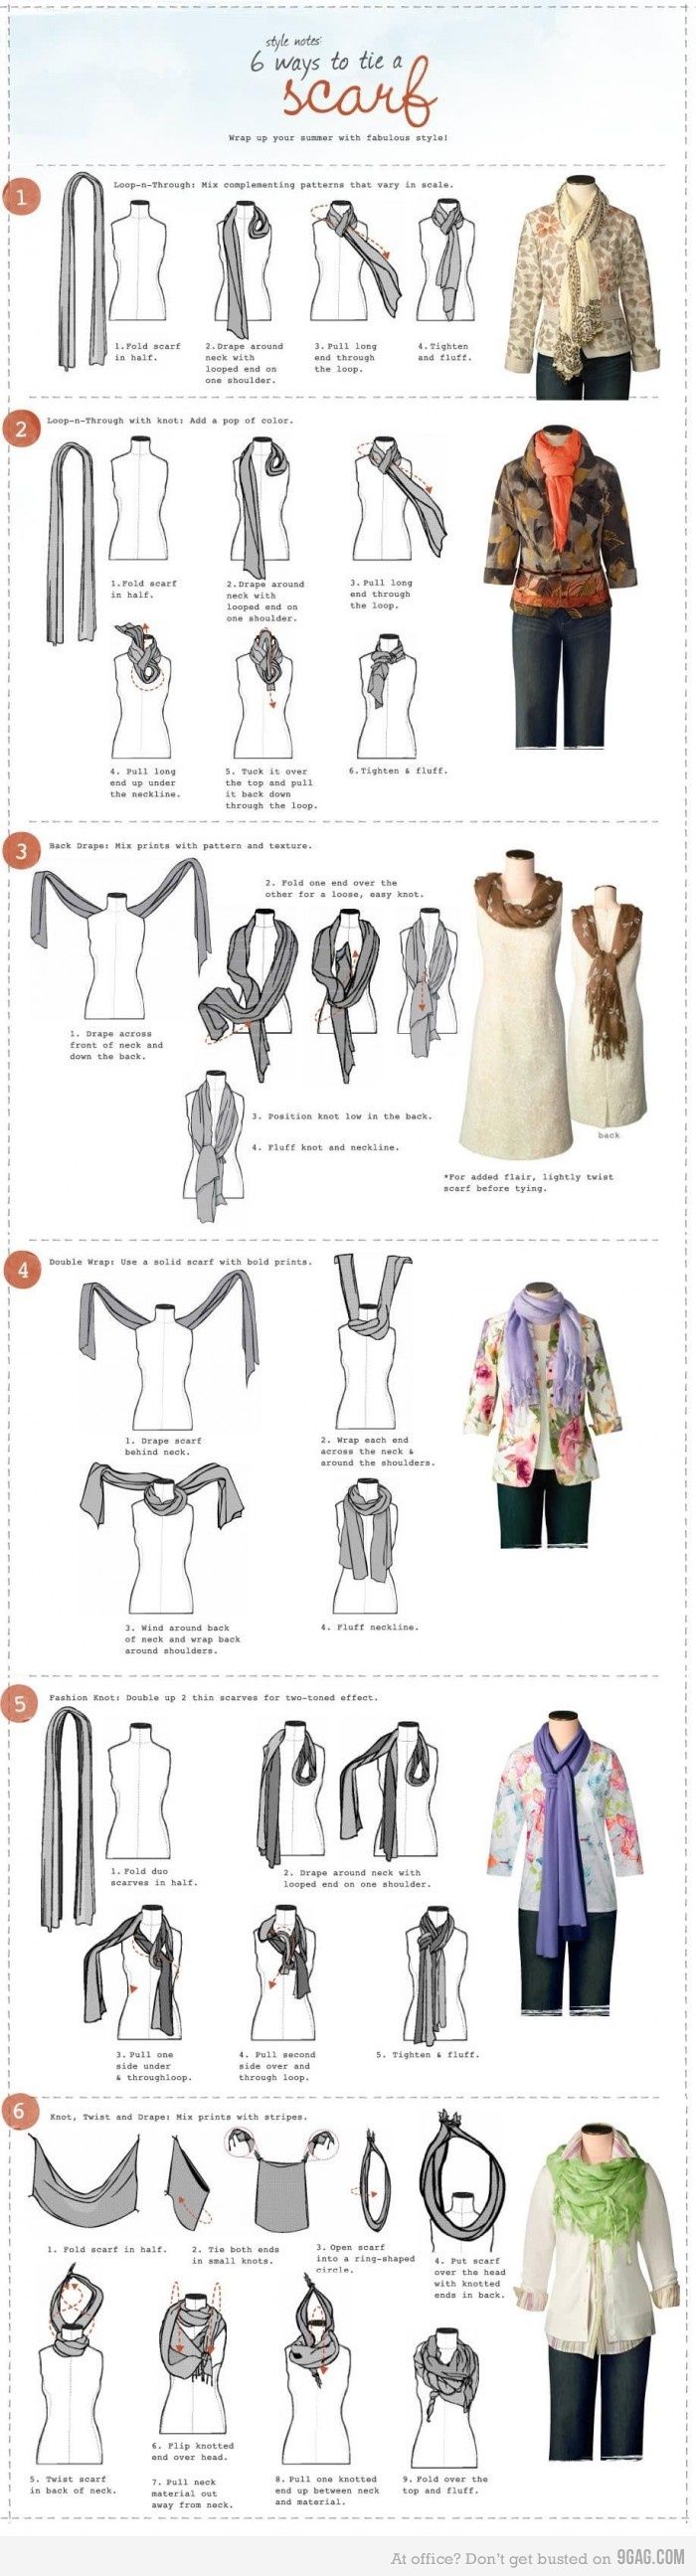 Here's some info on how to tie a scarf…..but how do you store and organize